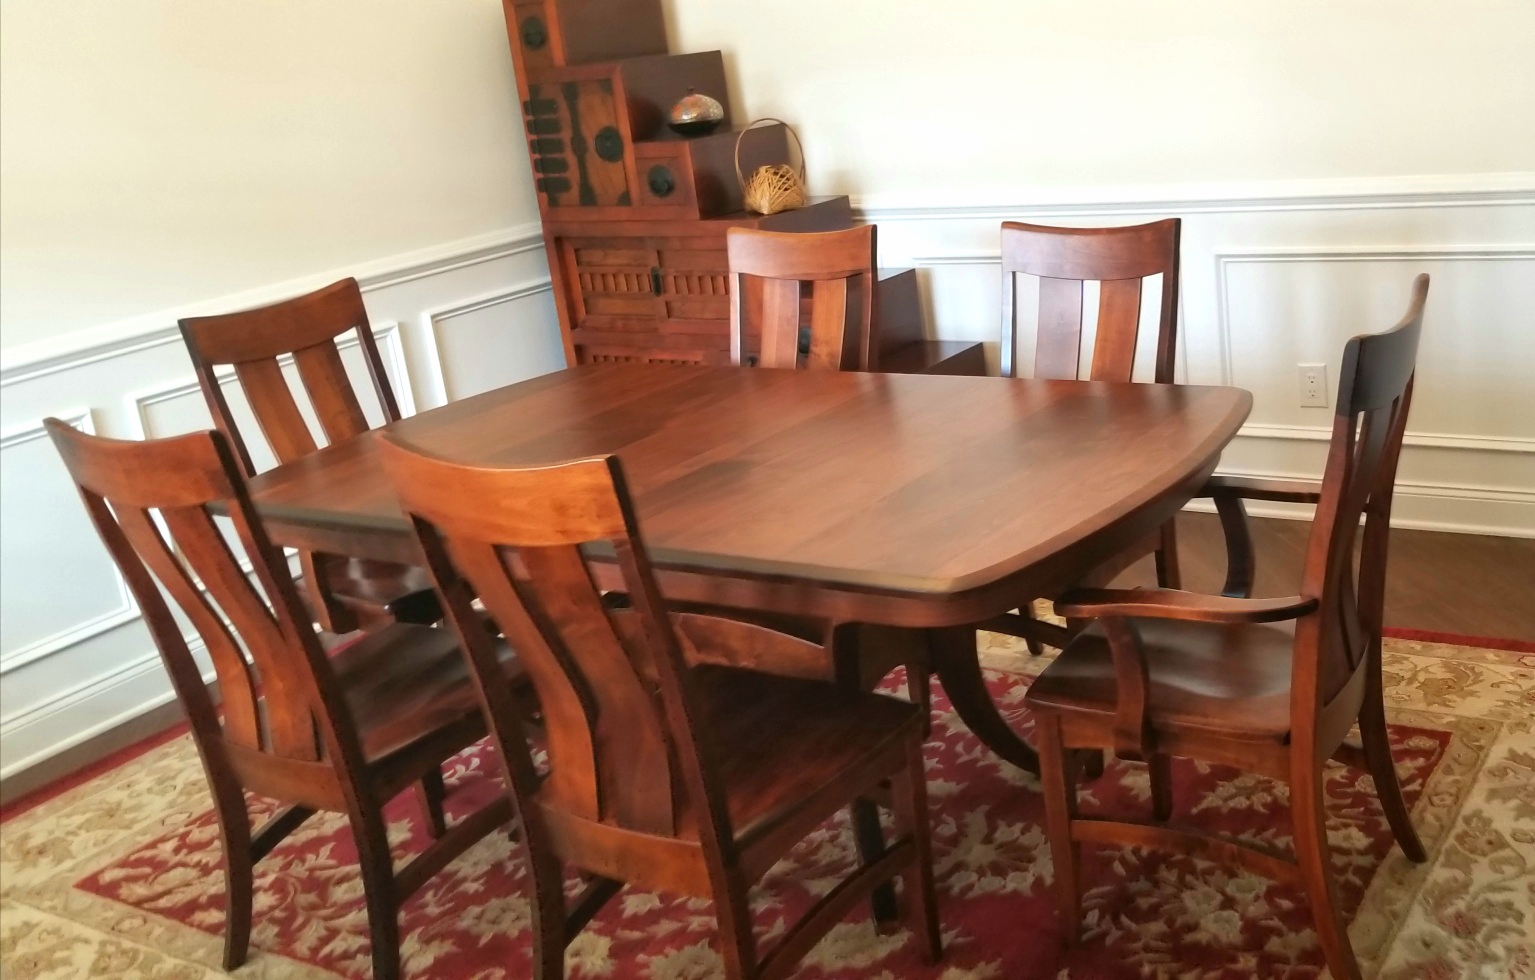 Amish craftsmen 7 piece set fully custom. The table is a Galveston double pedestal accompanied with lovely Galveston side chairs!